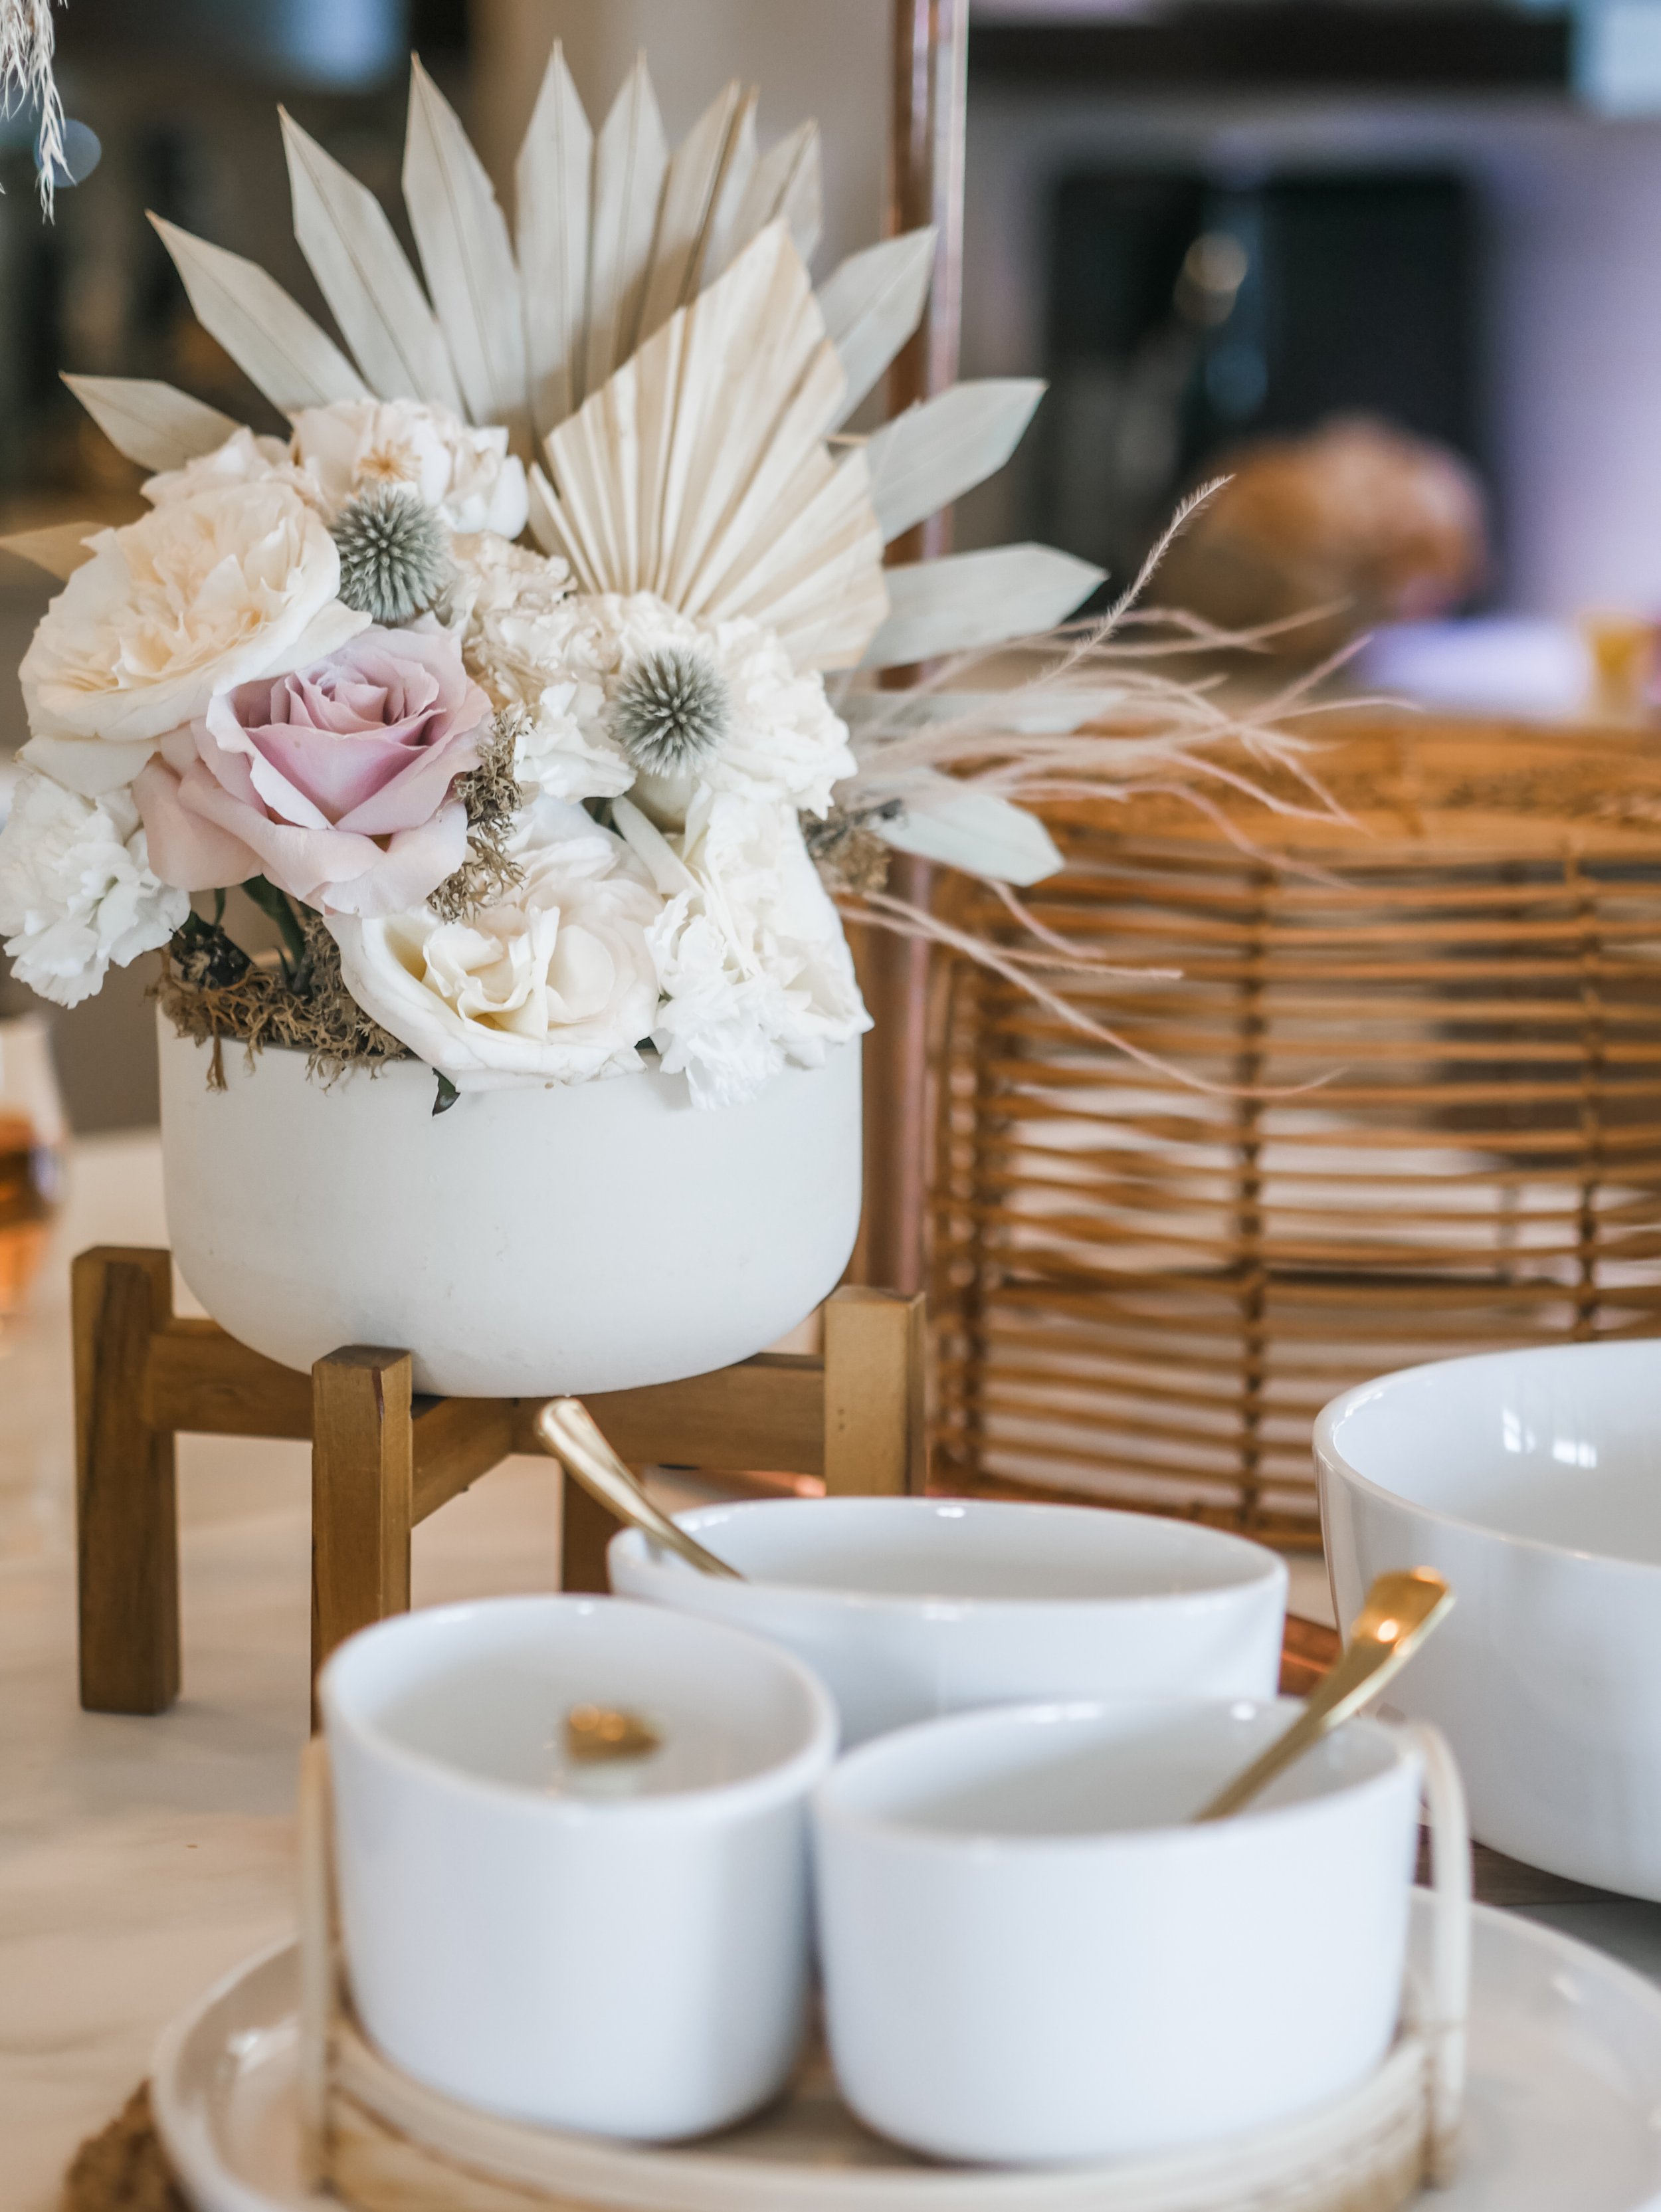  Elegant serving ware- Host a stylish and relaxed Tulum beach-inspired Baby Shower with these ideas for food bar, drink station, picnic style seating, decor and more from event designer Carolina of MINT Event Design in Austin, Texas. Get details and 